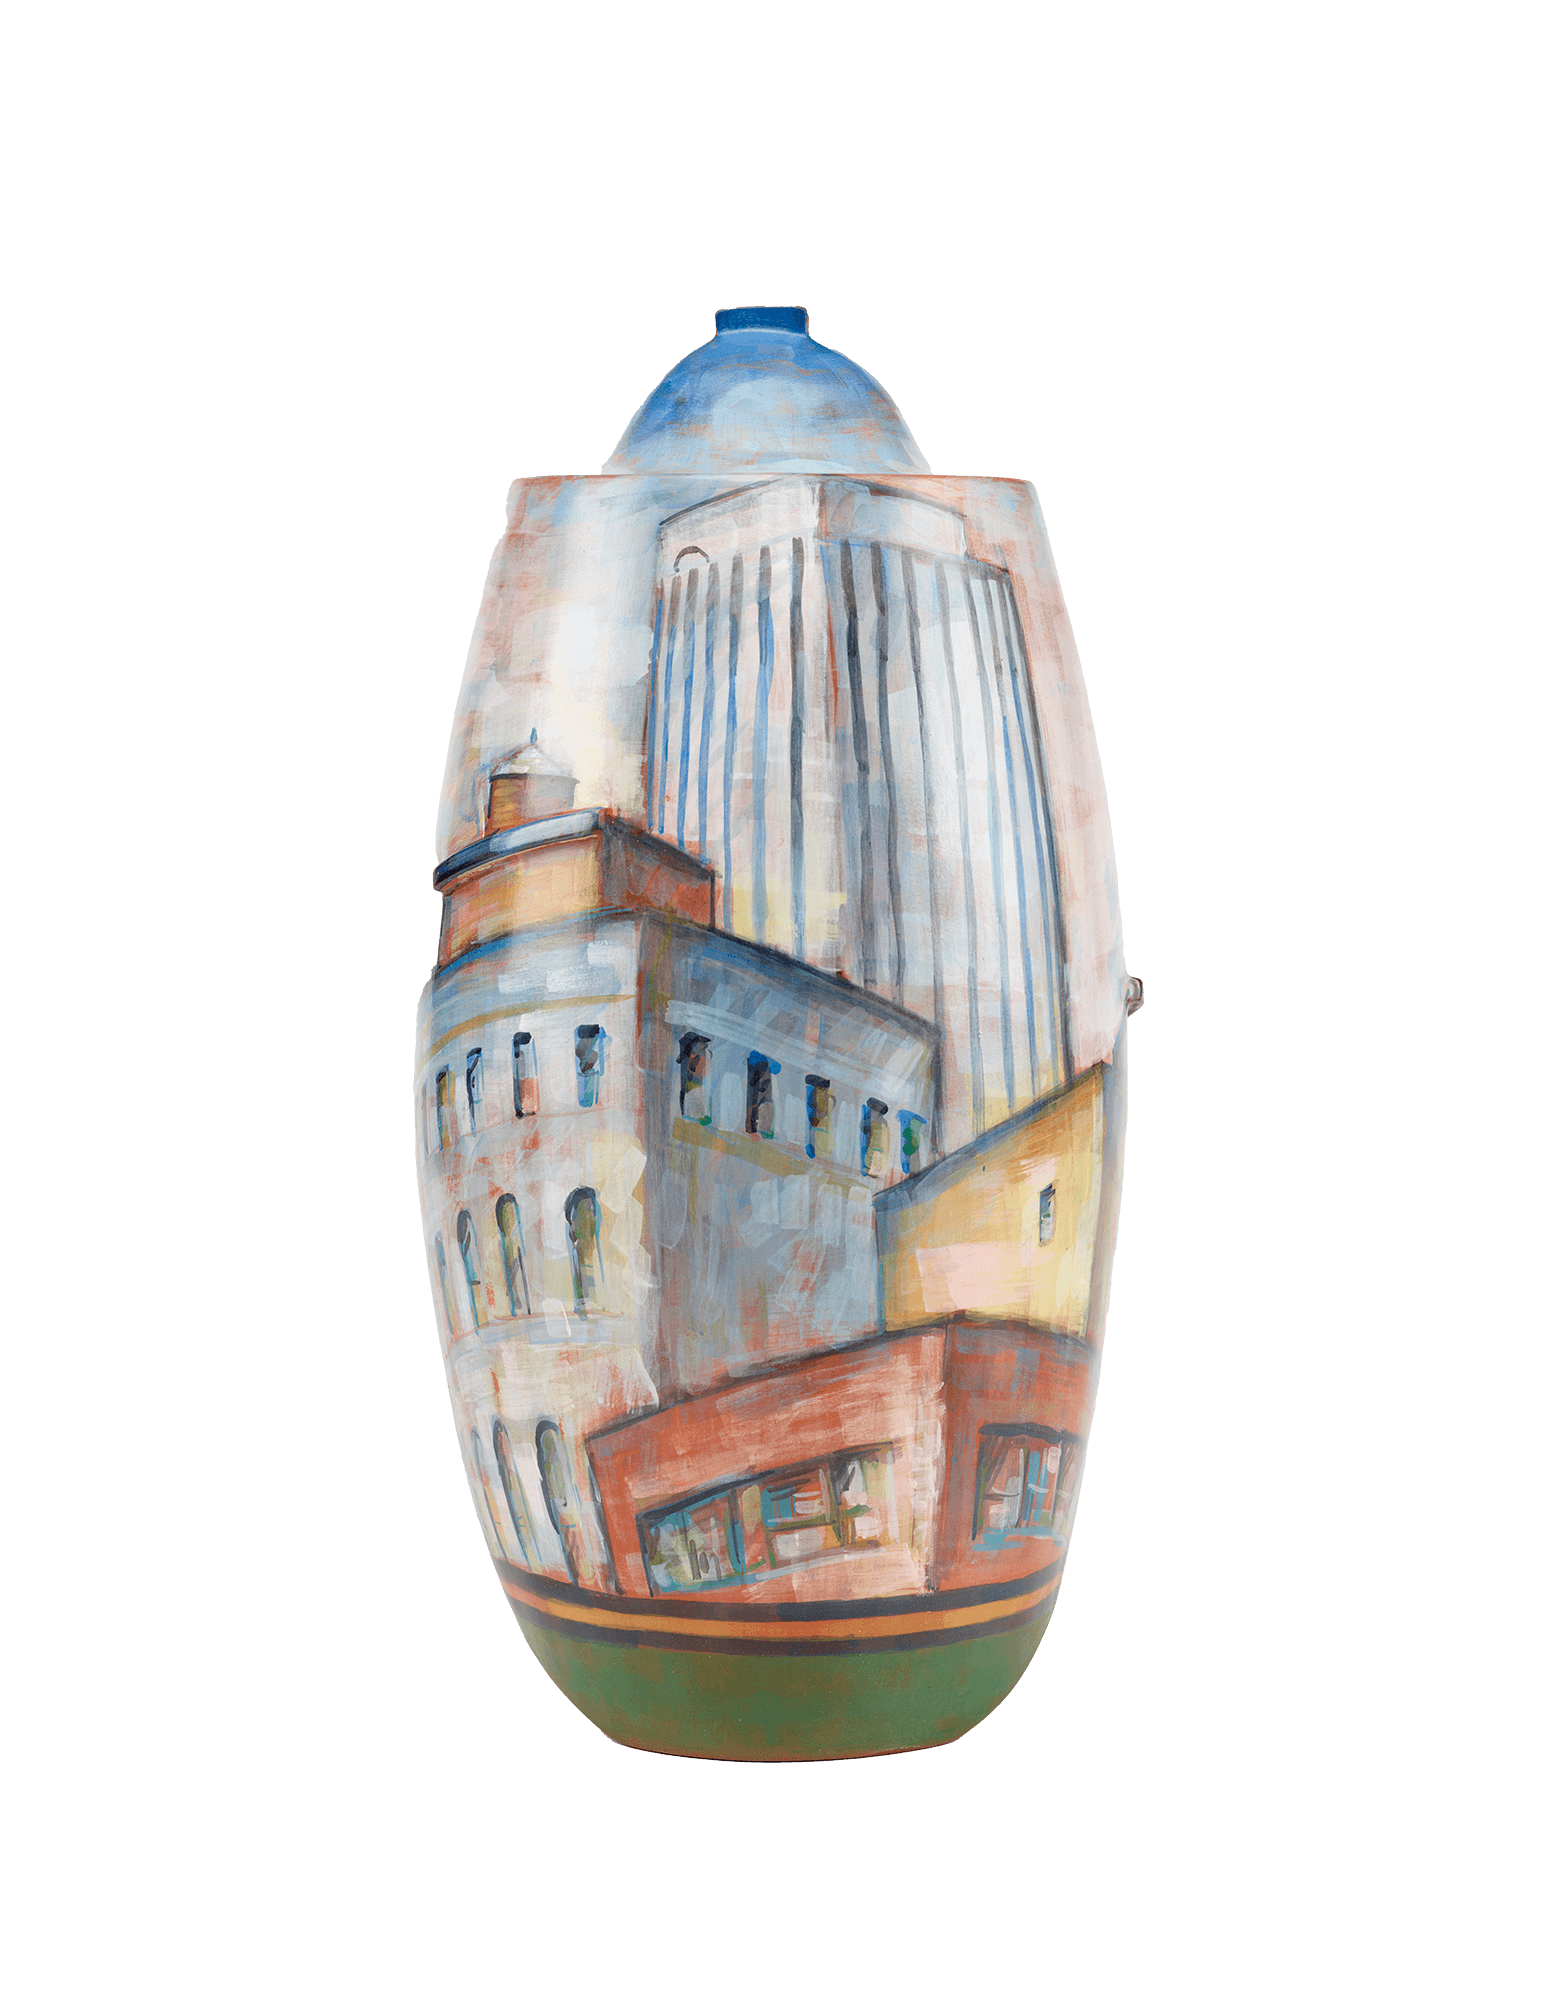 /Tall%20vessel%20with%20painted%20images%20of%20modern%20buildings.%20A%20small%2C%20blue-painted%20domed%20form%20on%20top.